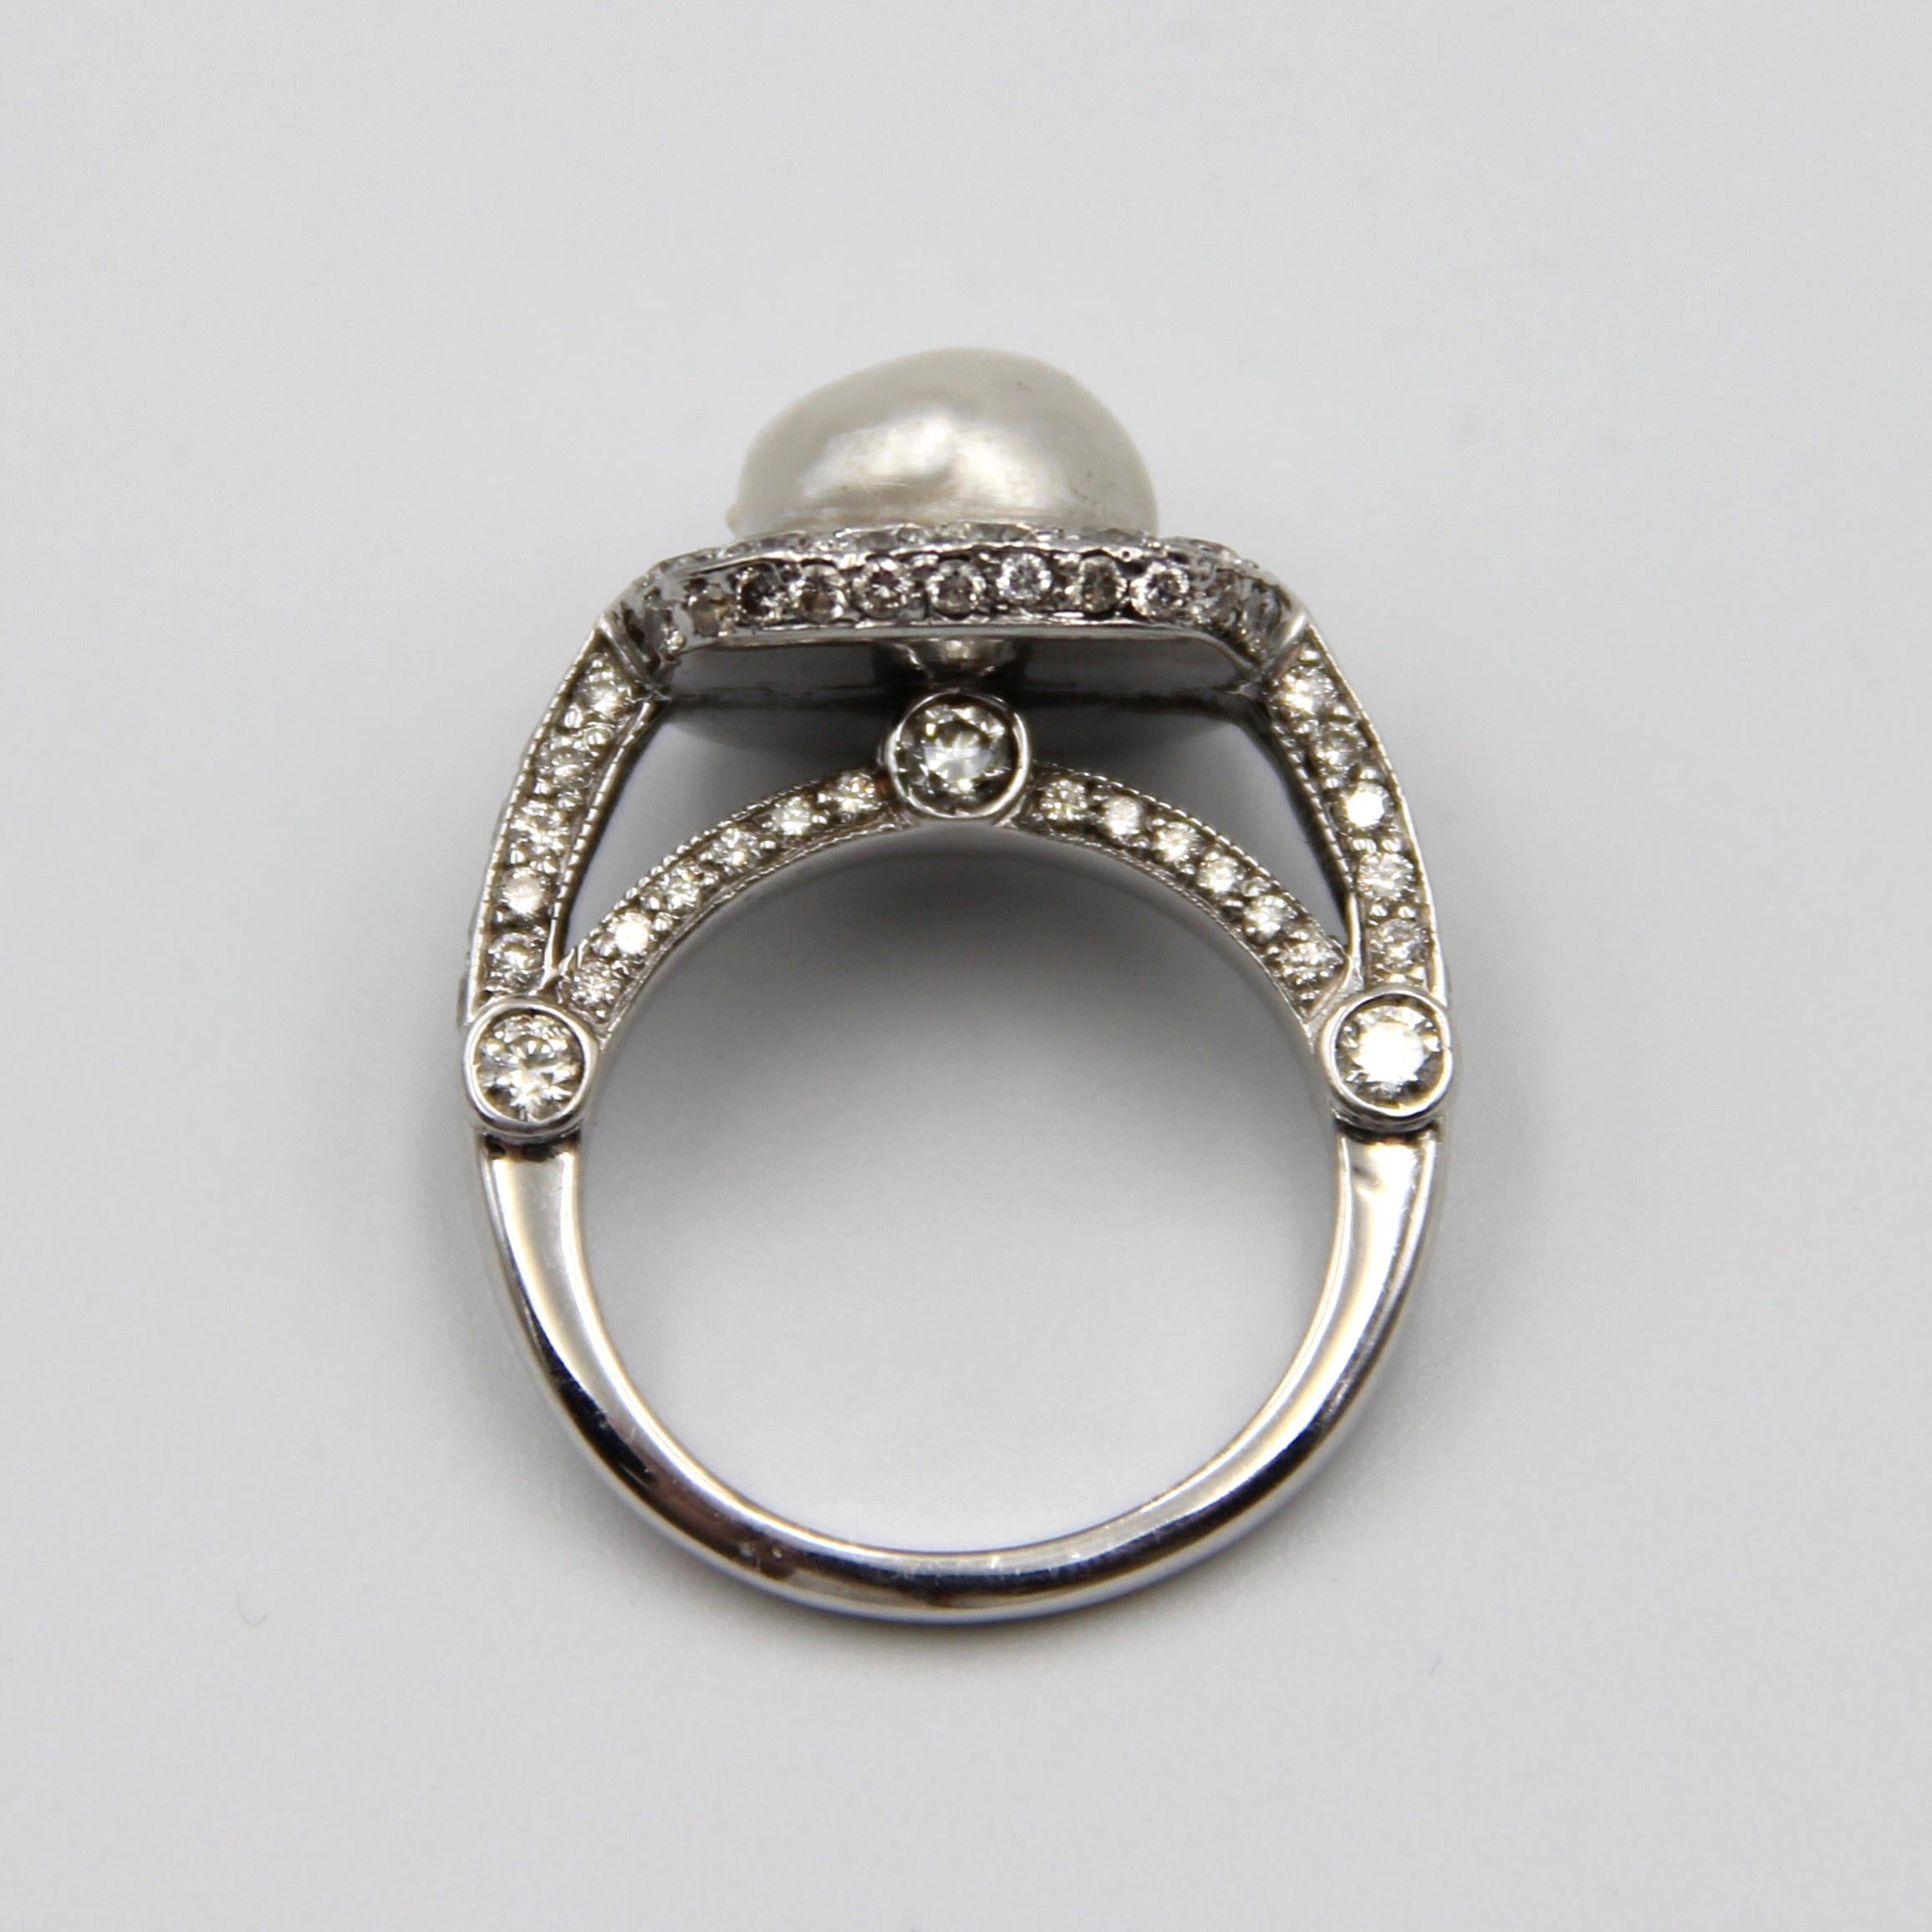 This amazing pearl ring rounded with approx. total 2carat Old European Cut Diamonds . Circa 1920